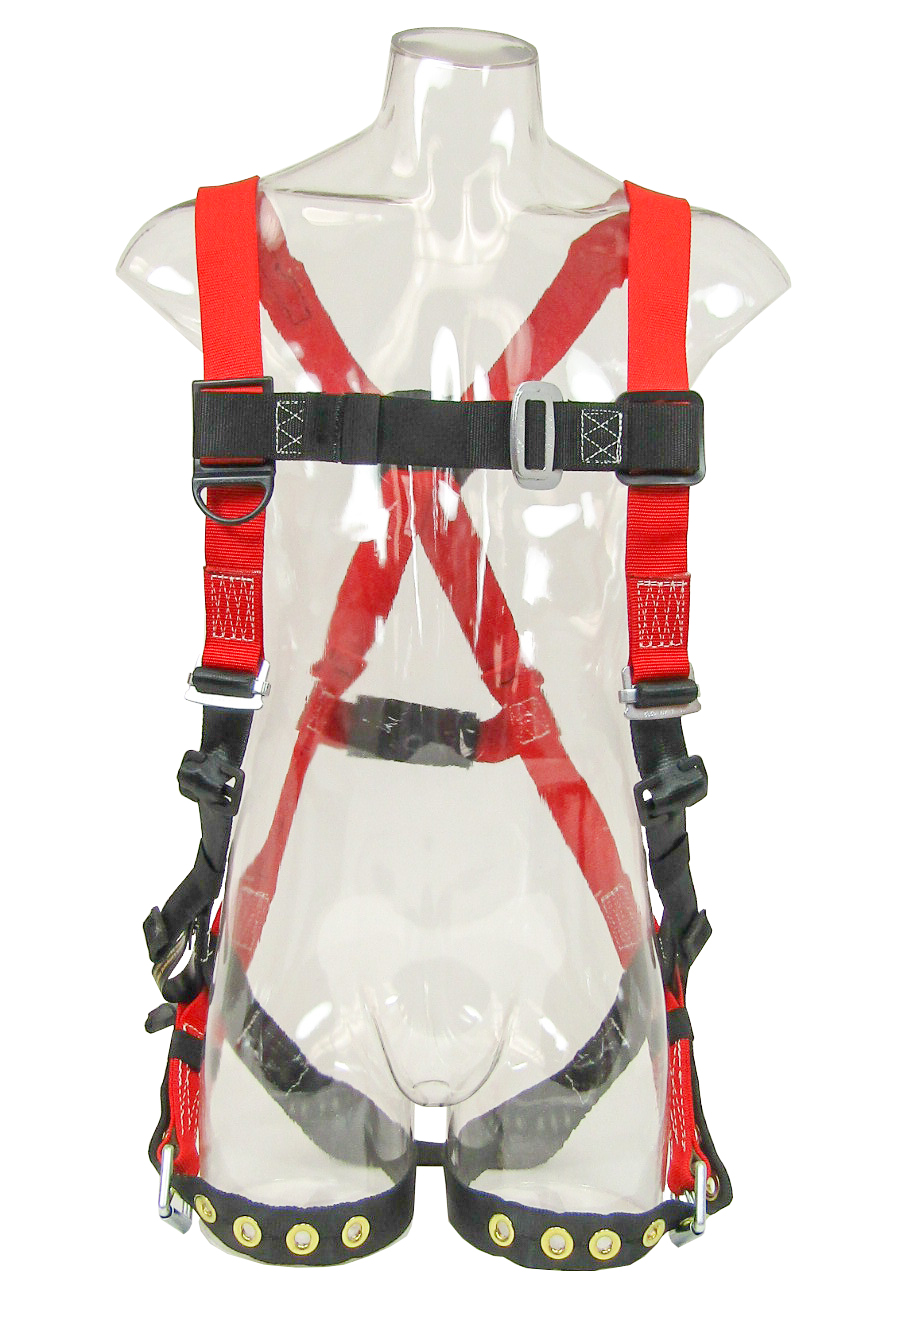 Replacement Continuous Harness Webbing with Center Grommet